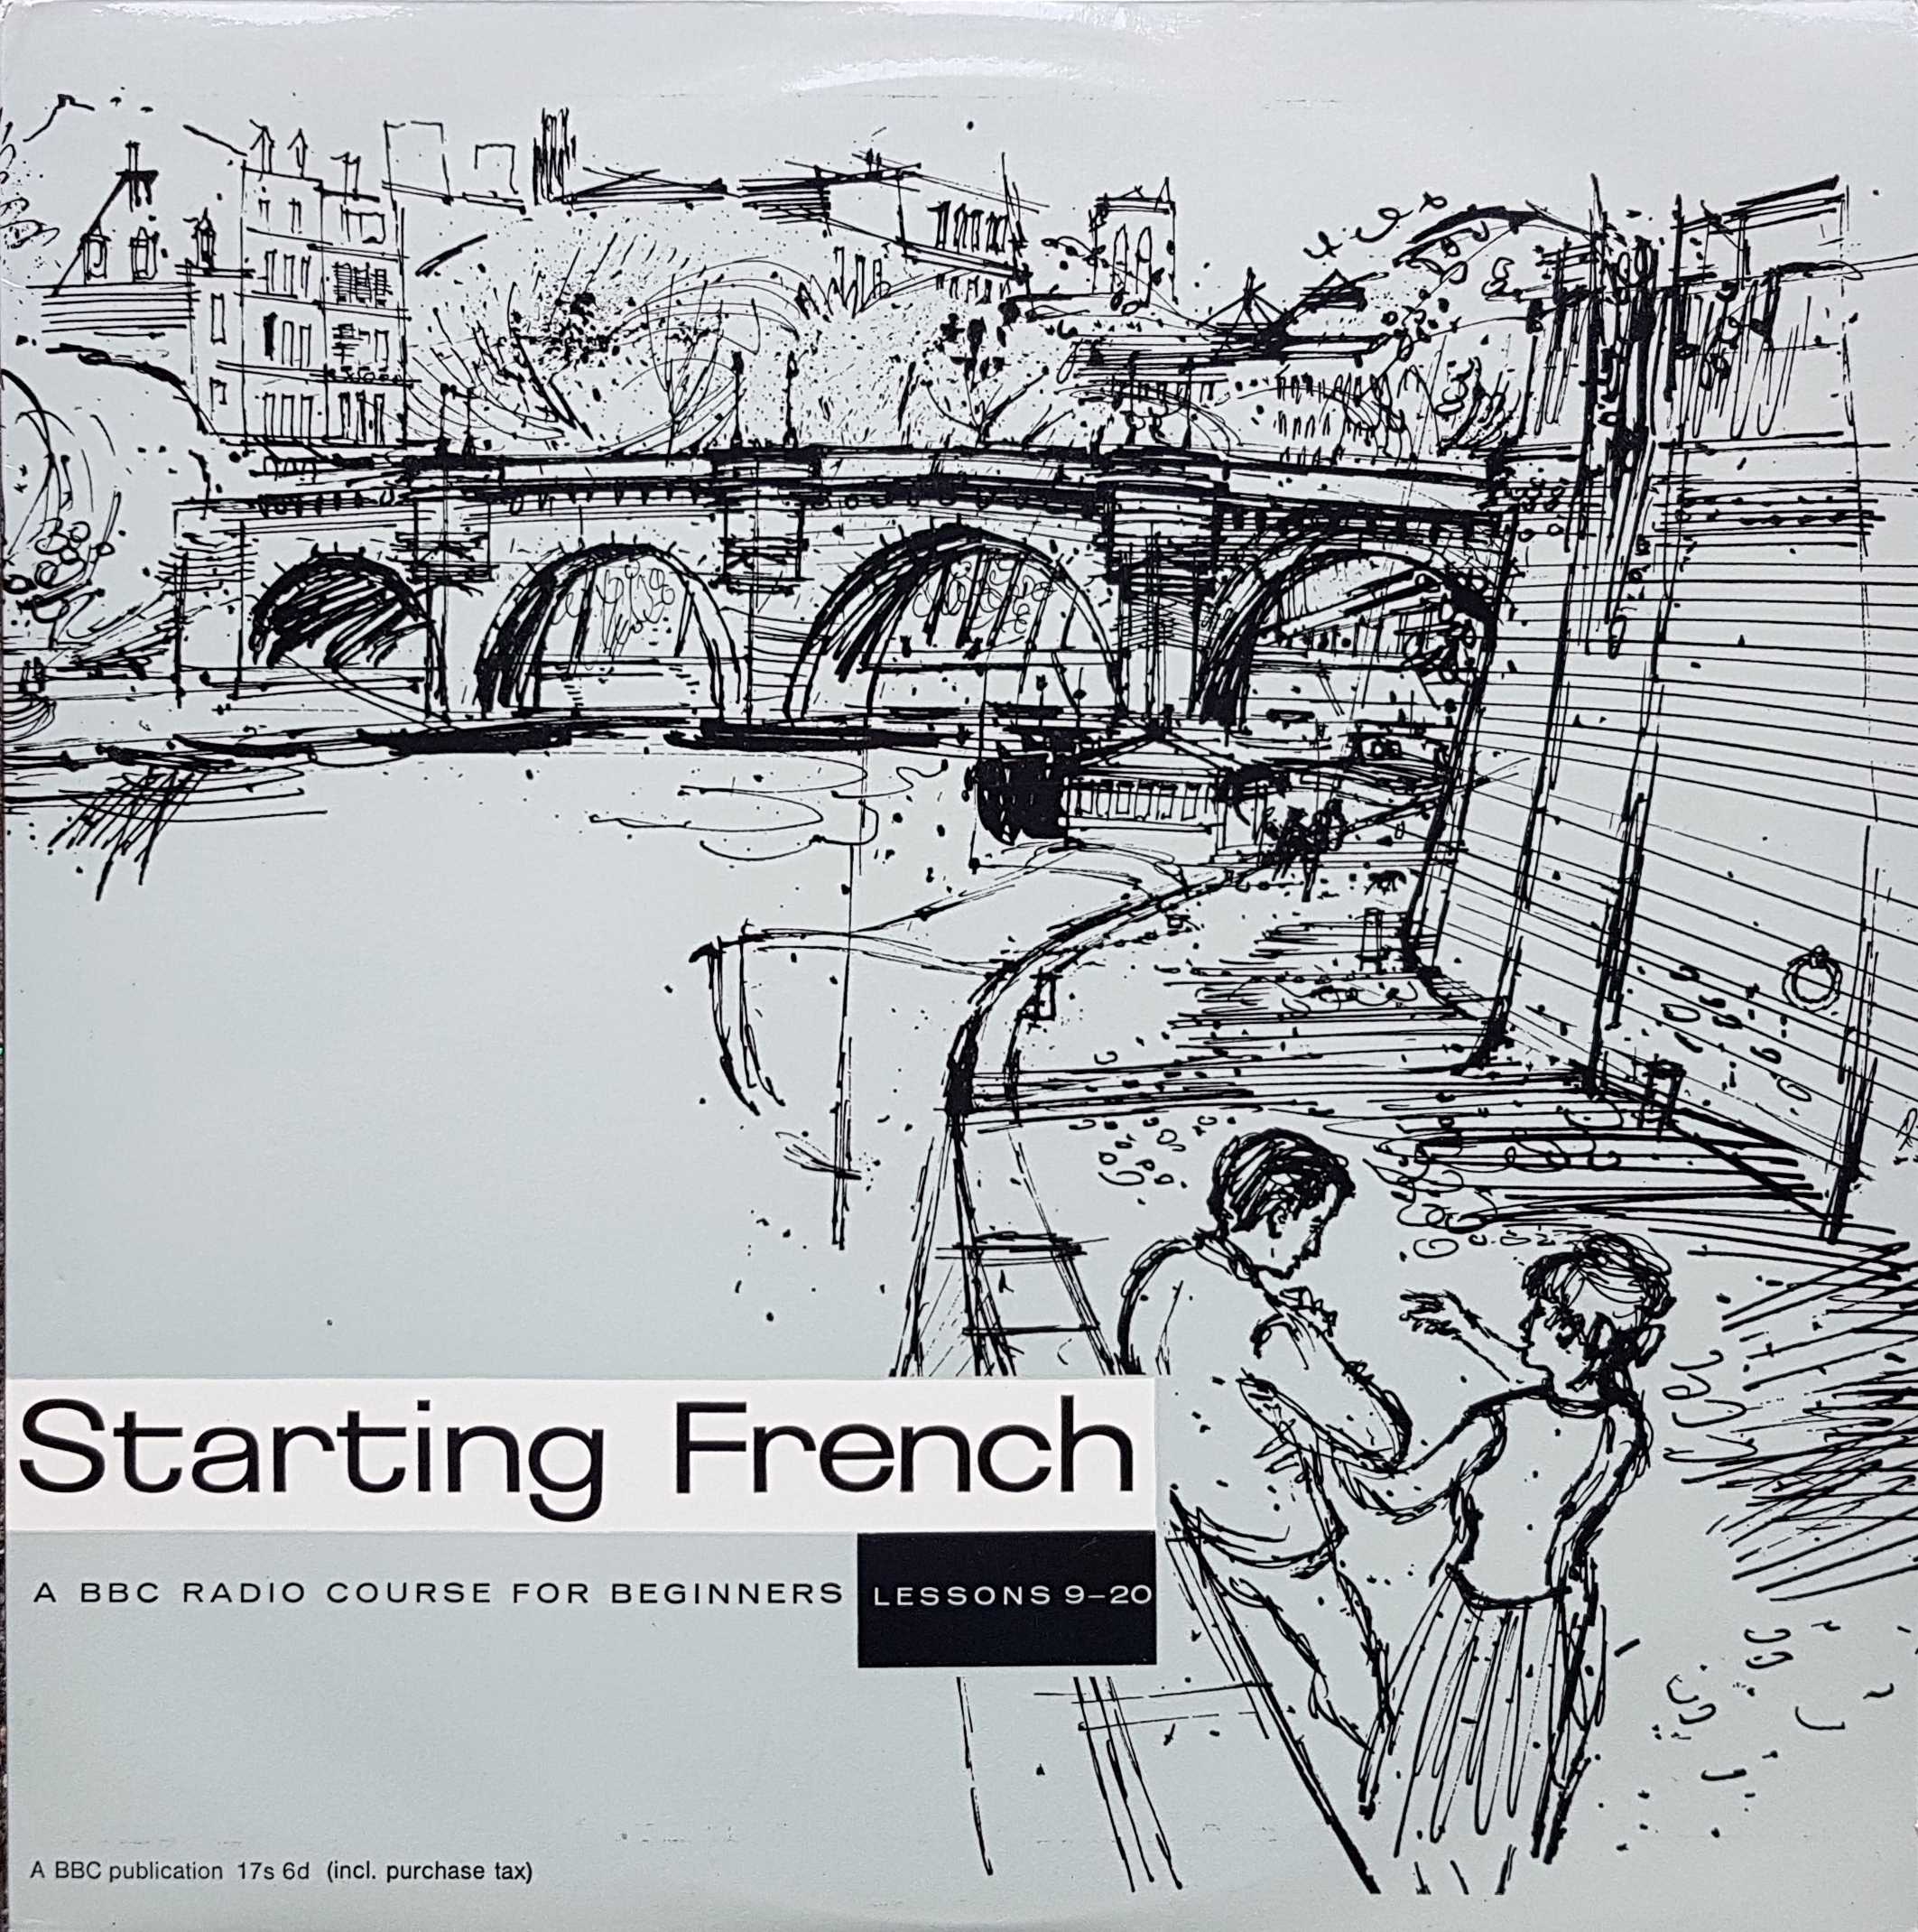 Picture of Starting French - Parts 9 - 20 by artist Elsie Ferguson from the BBC albums - Records and Tapes library